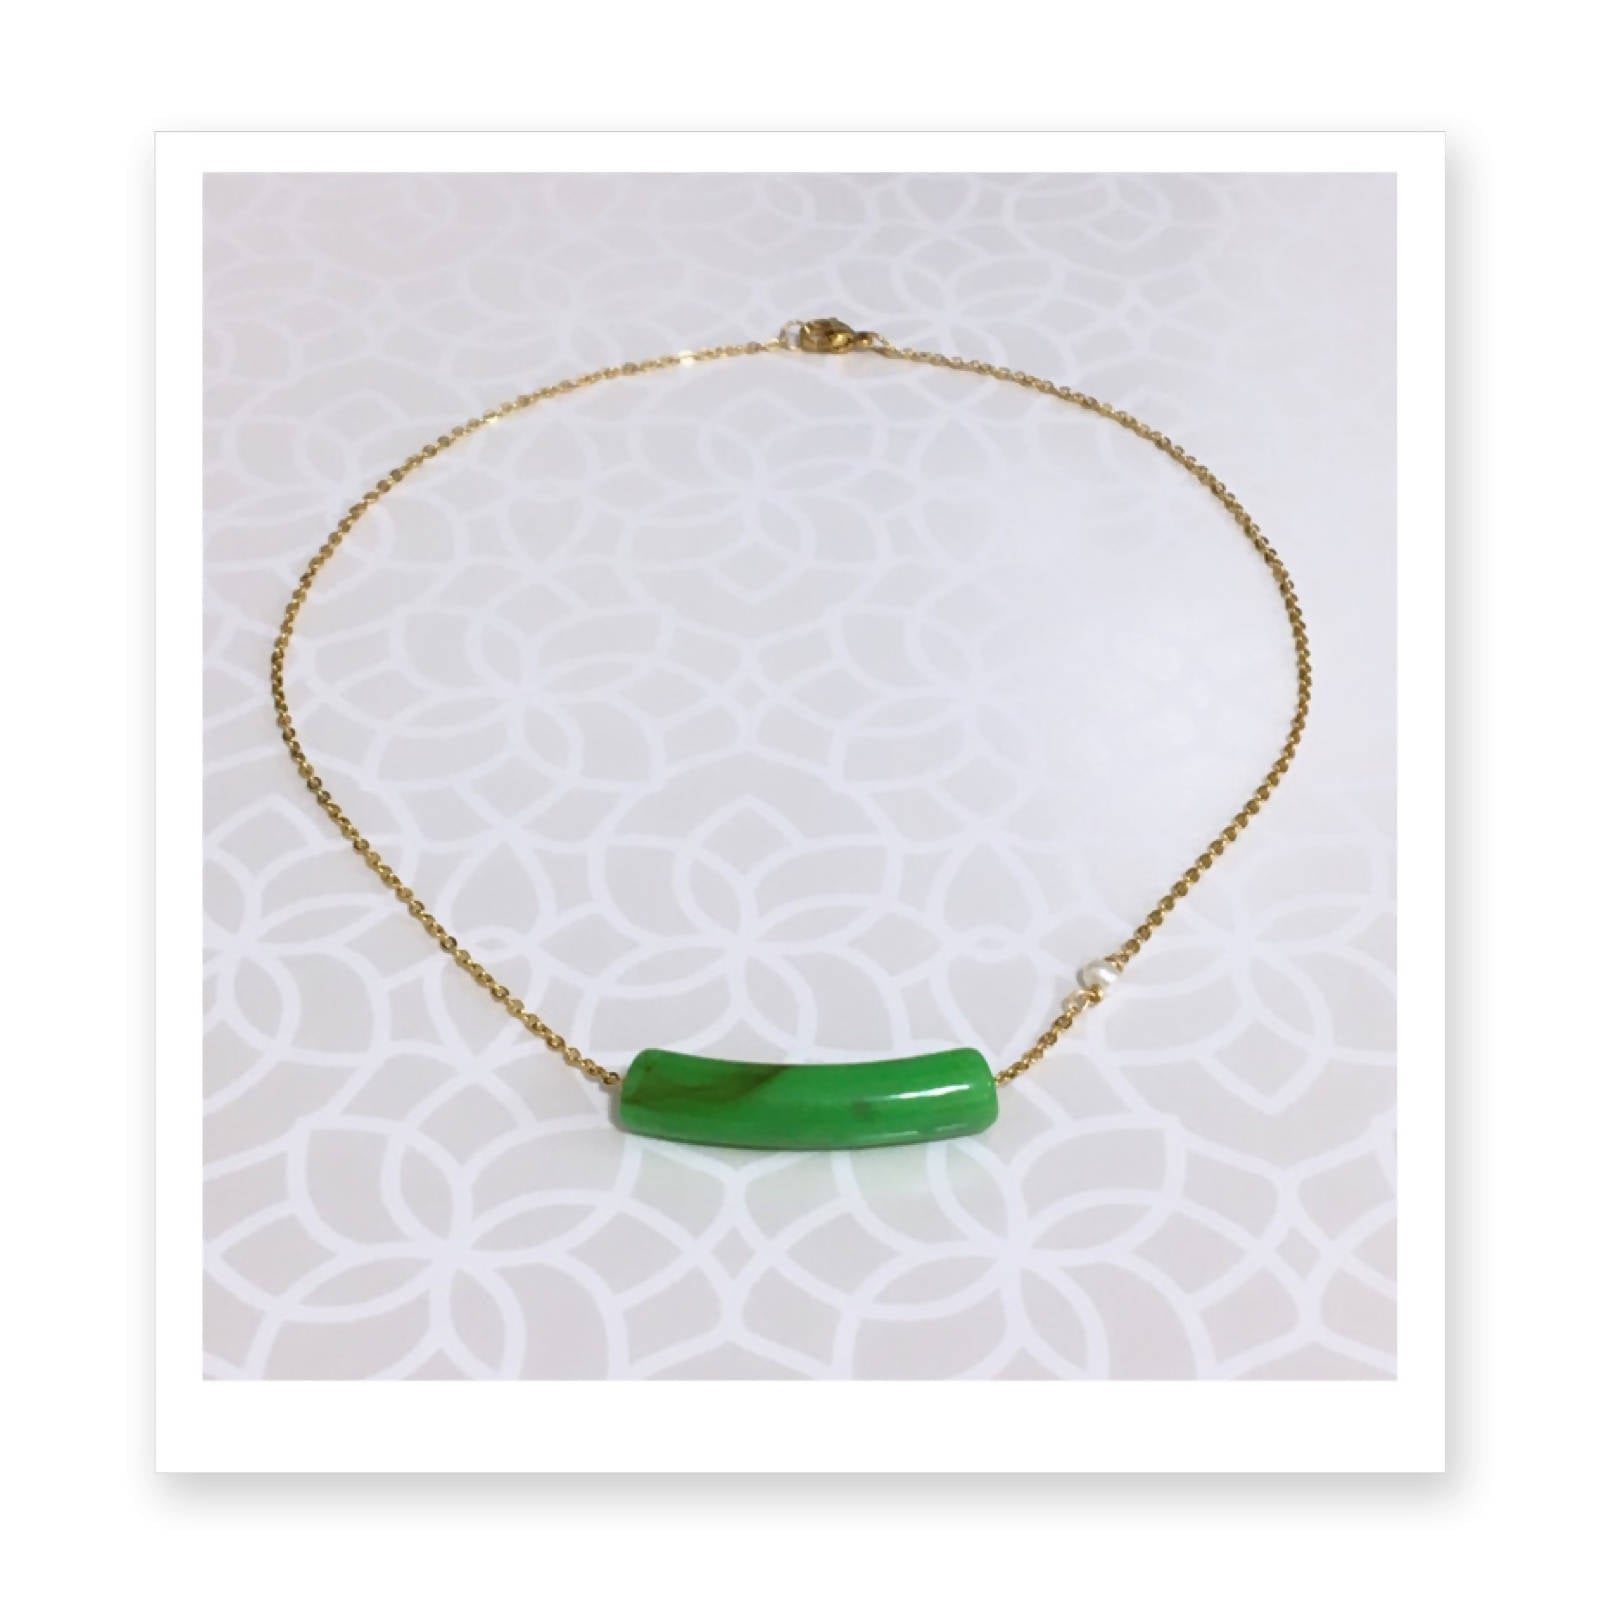 Loulicious Jade Necklace with Pearl